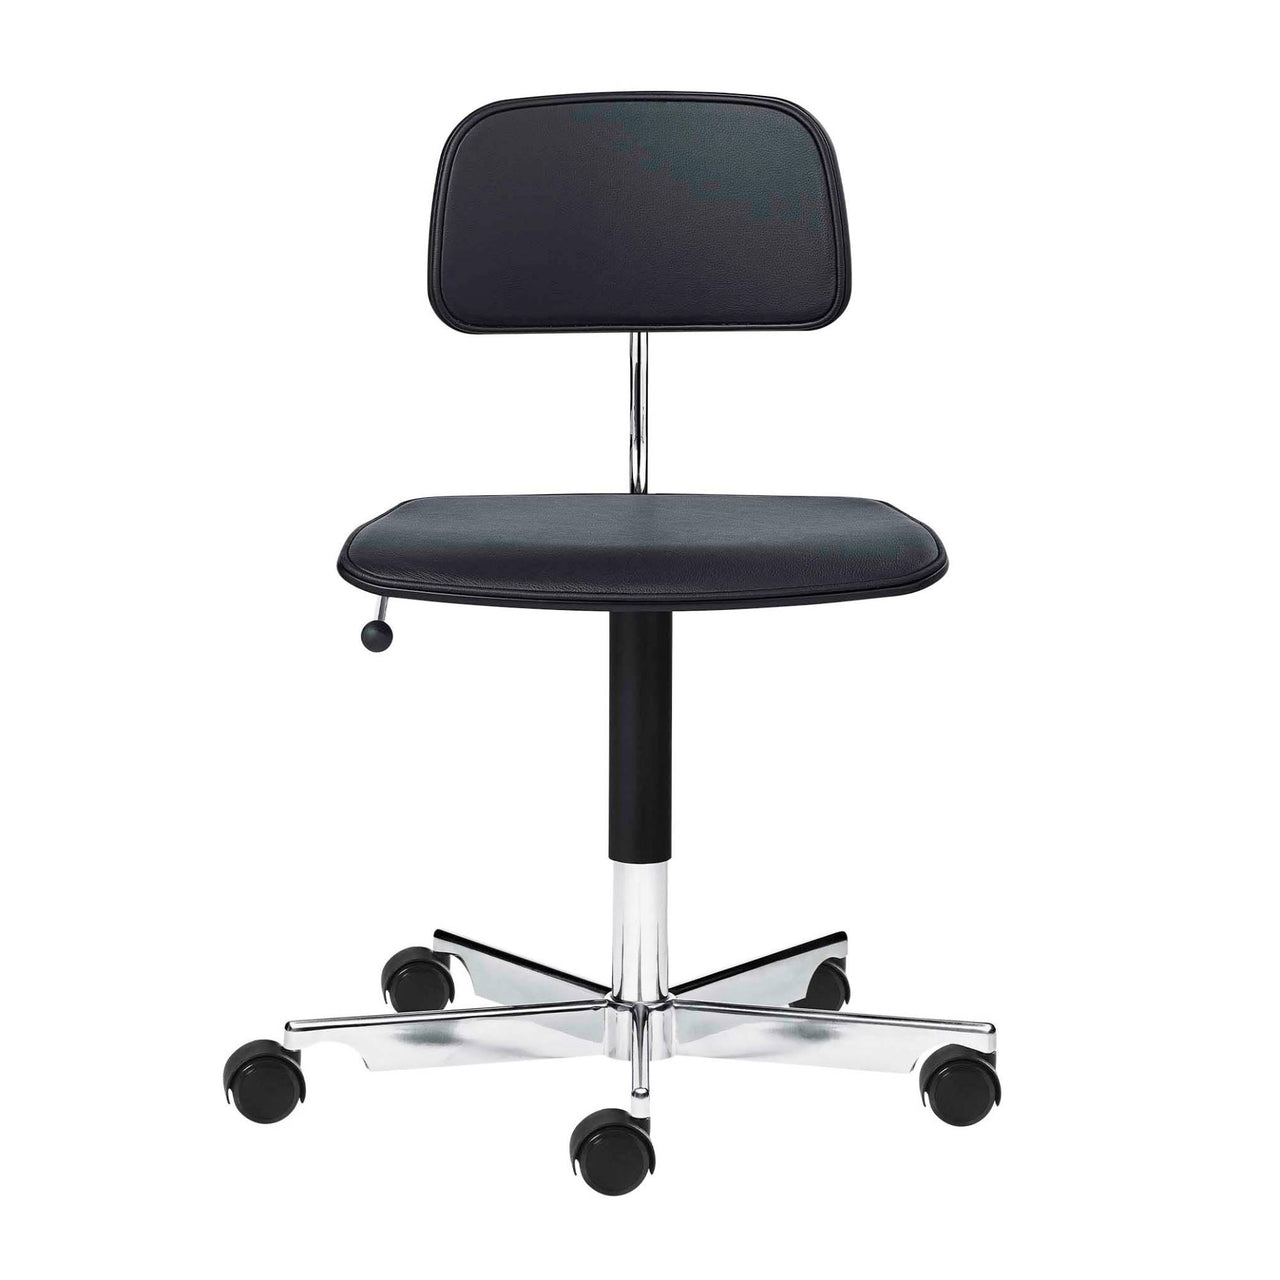 Kevi 2533 Chair: Size A + Front Upholstered + Lazure - Black